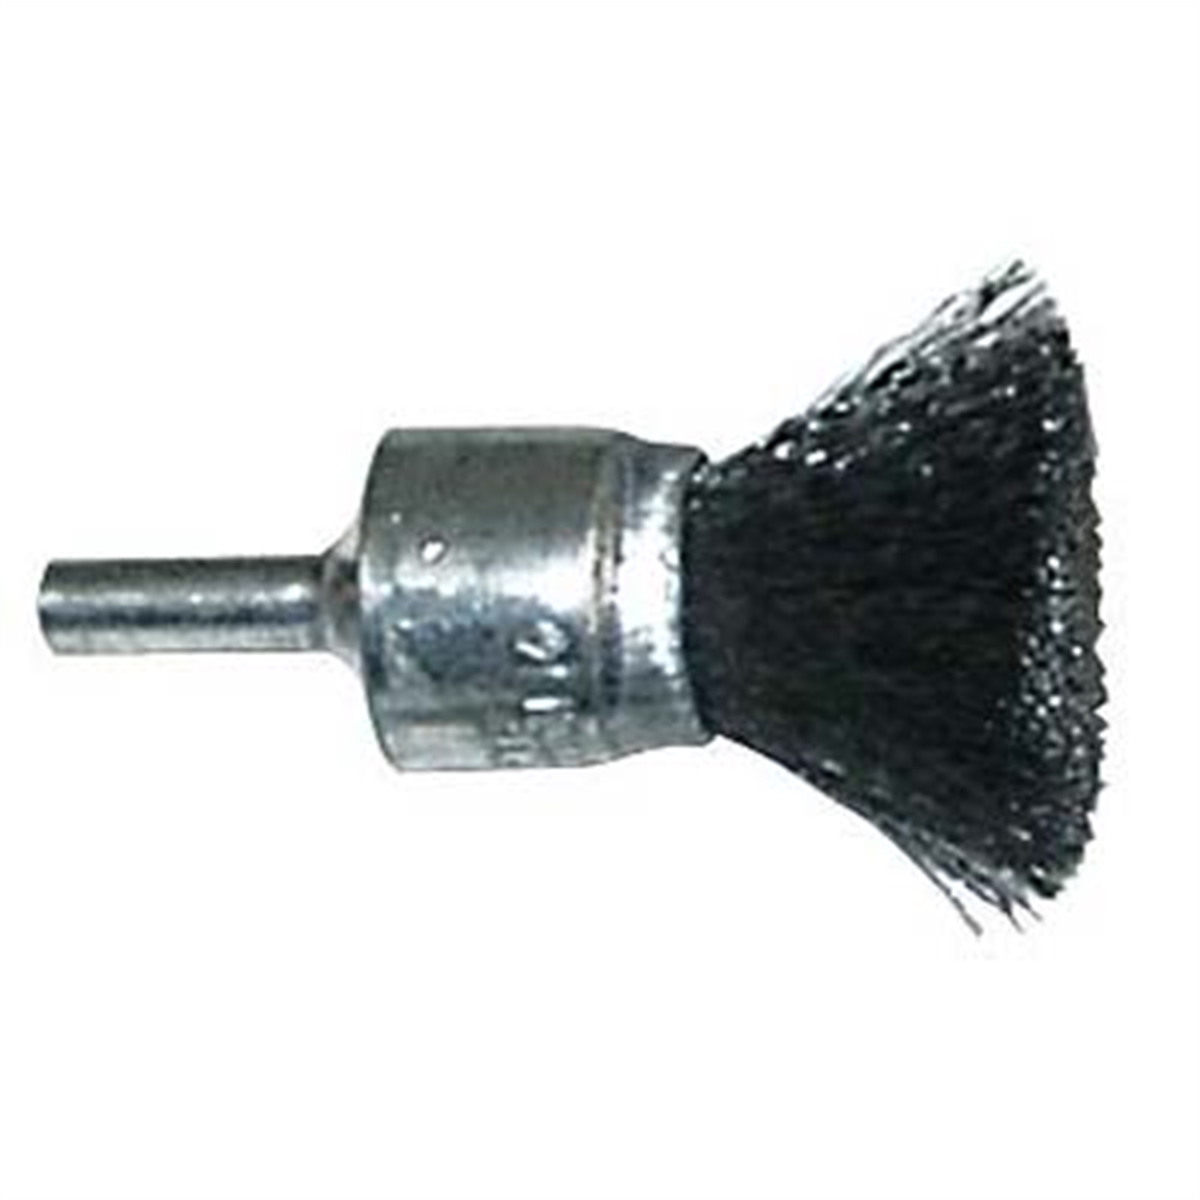 Wire Wheel Crimped End Brush - 3/4" x 1/4" Shank .020 Wire